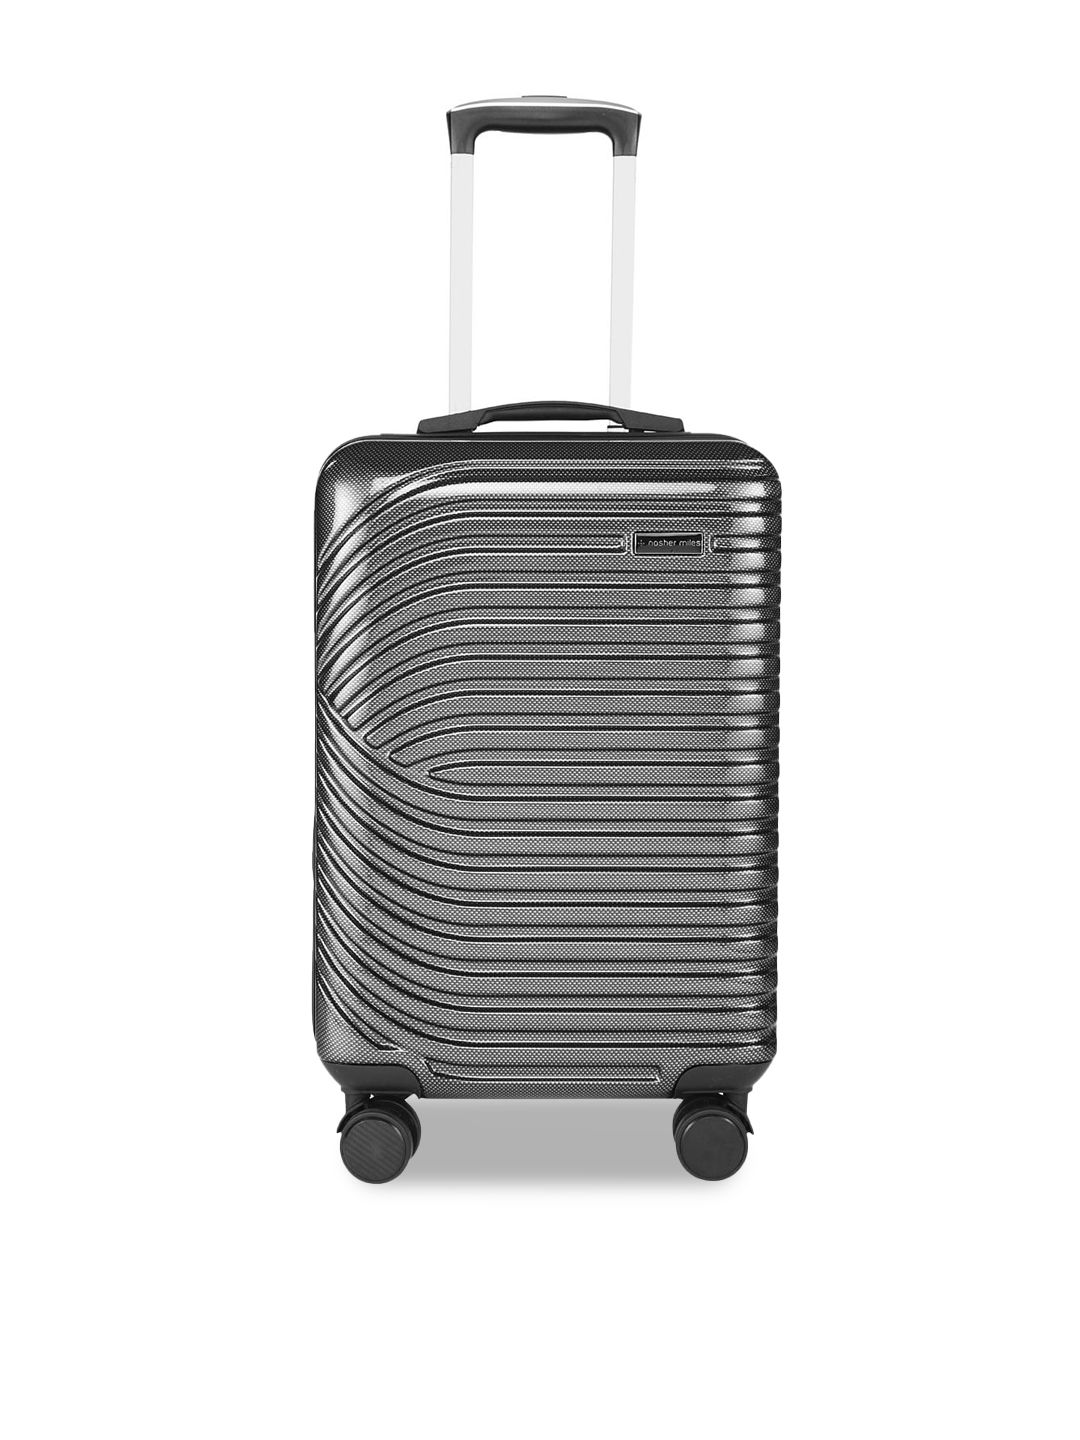 Nasher Miles Black Textured Hard-Sided Medium Trolley Suitcase Price in India